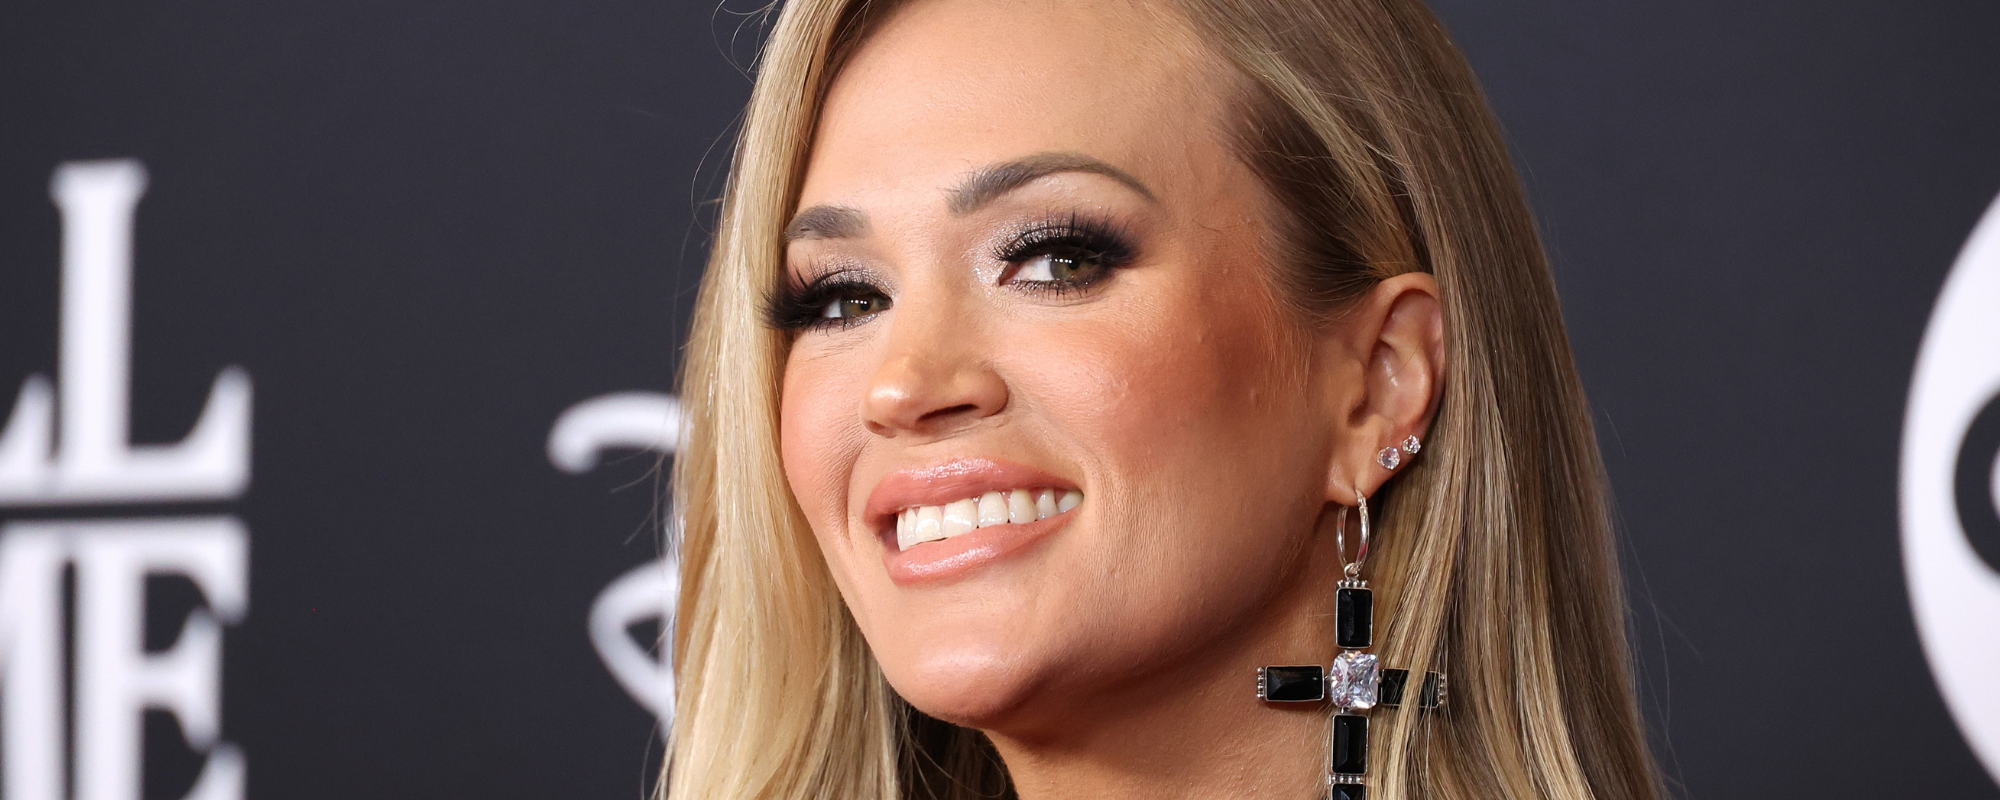 Behind the Meaning of Carrie Underwood’s “All-American Girl”